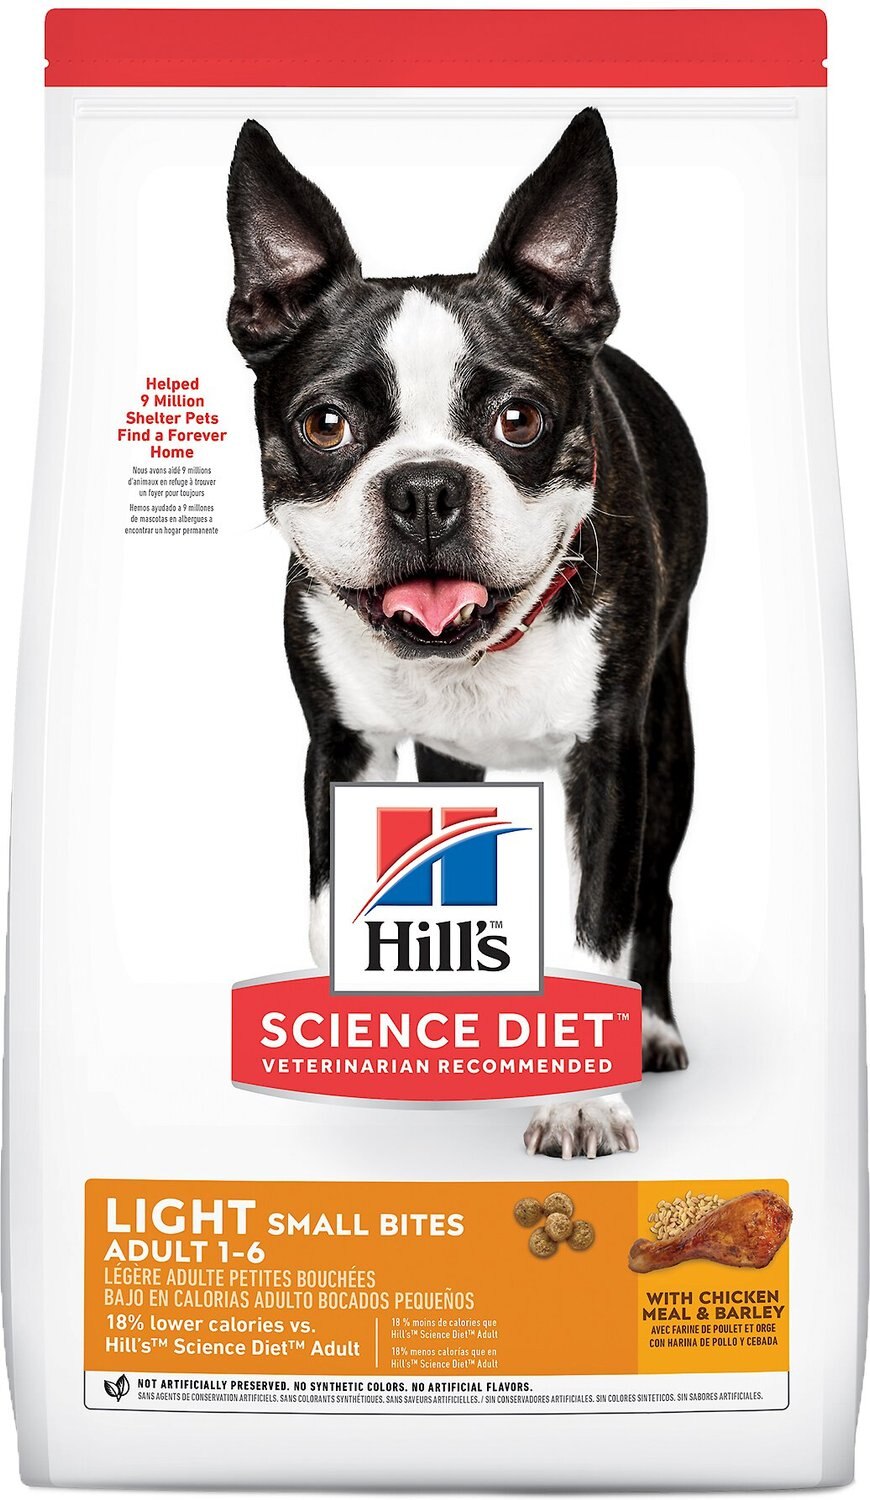 science diet toy breed